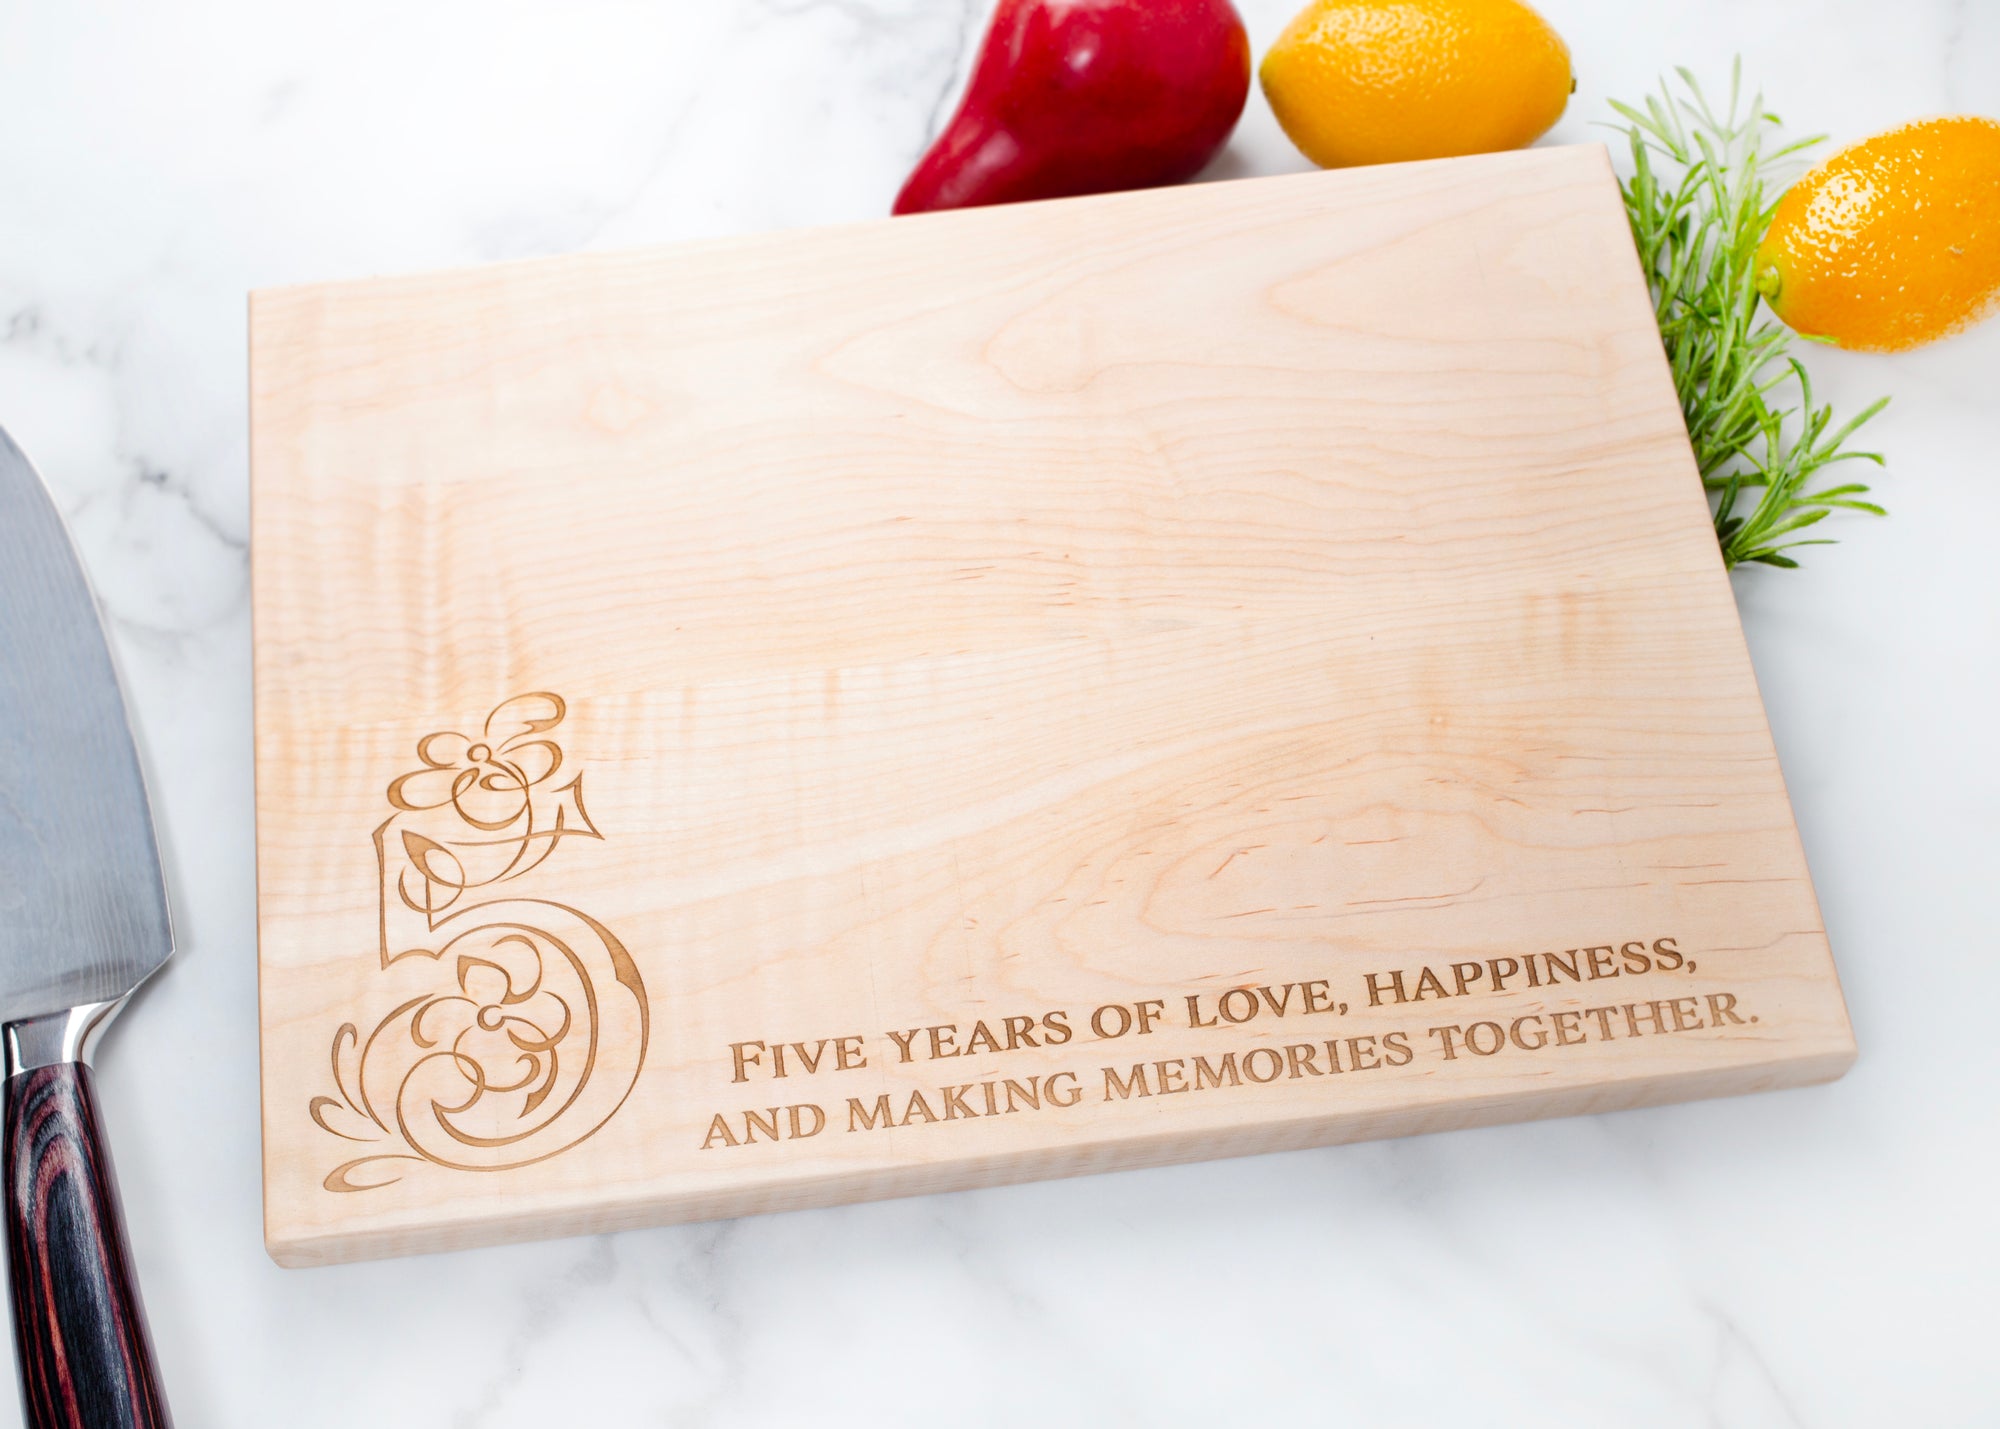 This 5th anniversary personalized cutting board is the perfect wedding, housewarming, or anniversary gift for a couple. Crafted from high-quality wood, the board is sure to last through countless meals and celebrations. It can be personalized with both of their names for an extra special touch. Make their special day even more memorable with this beautiful and meaningful gift